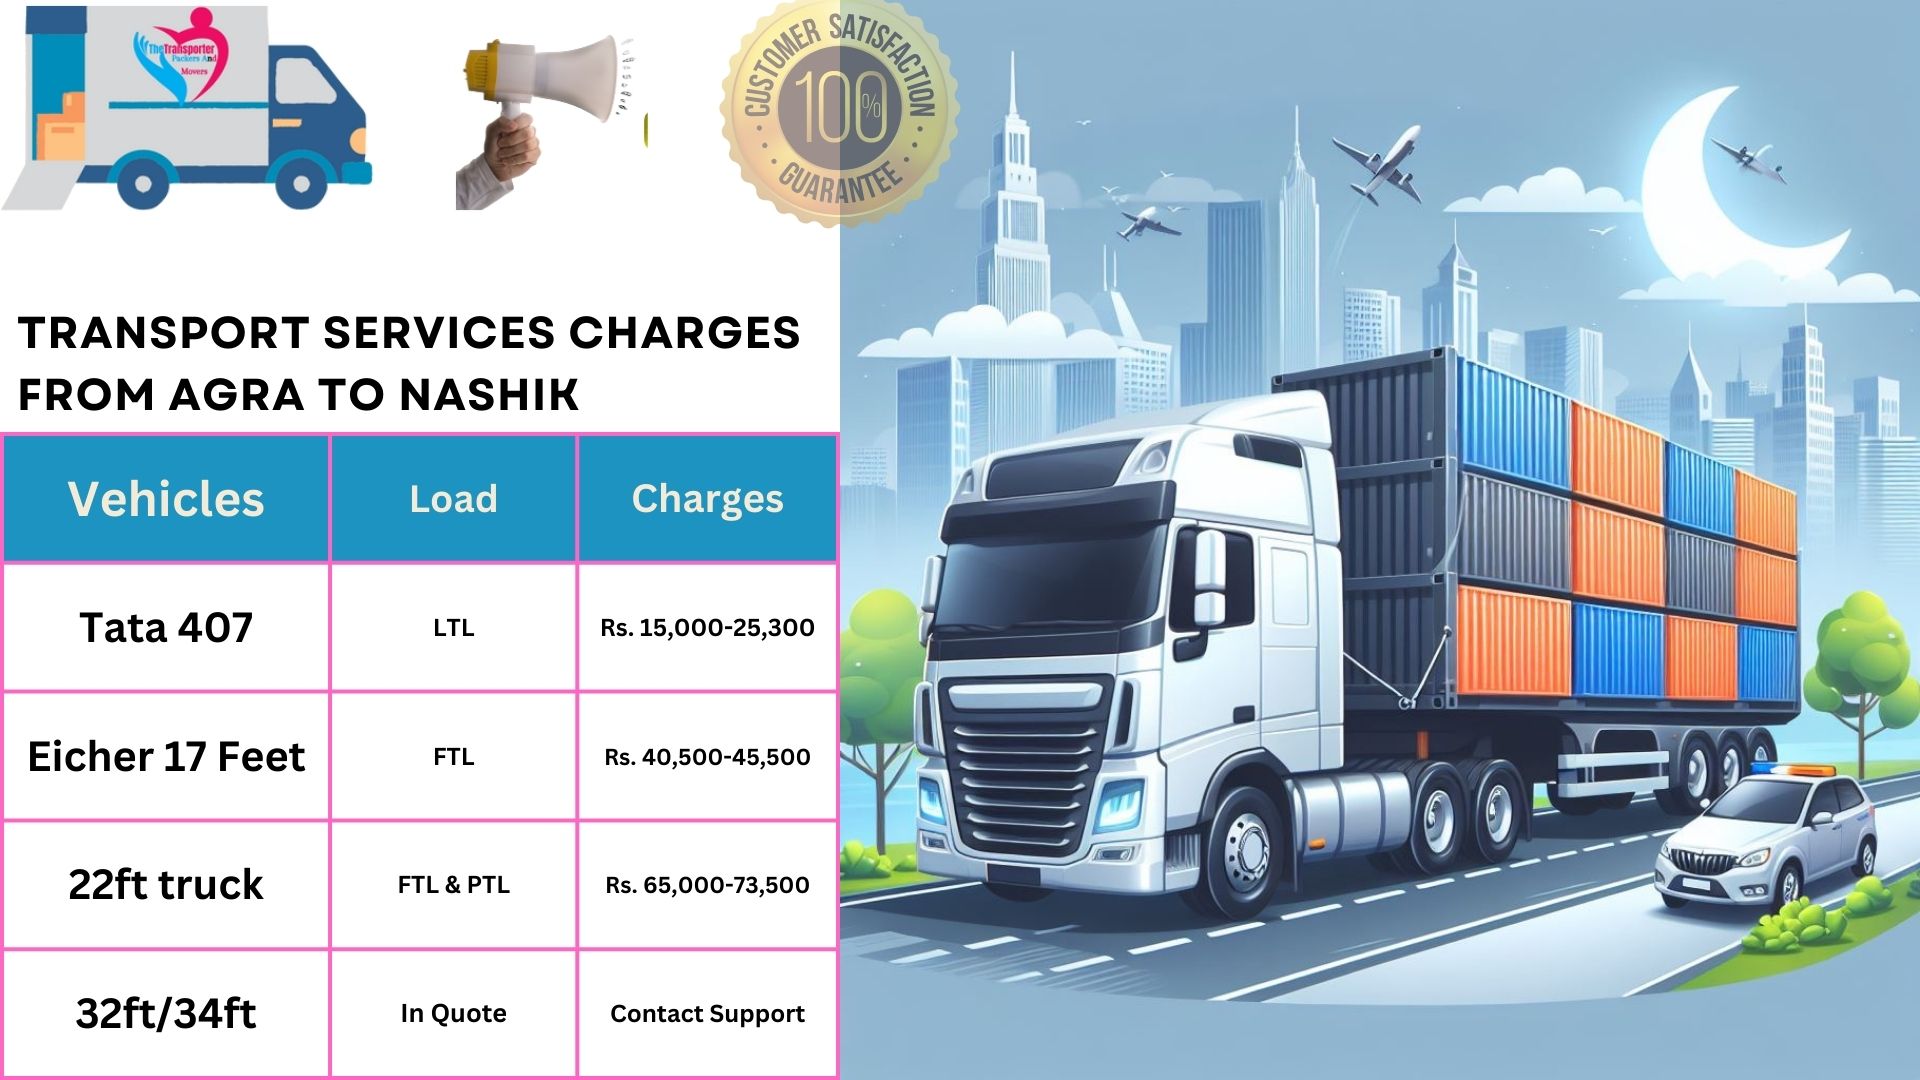 Your household goods shifting from Agra to Nashik